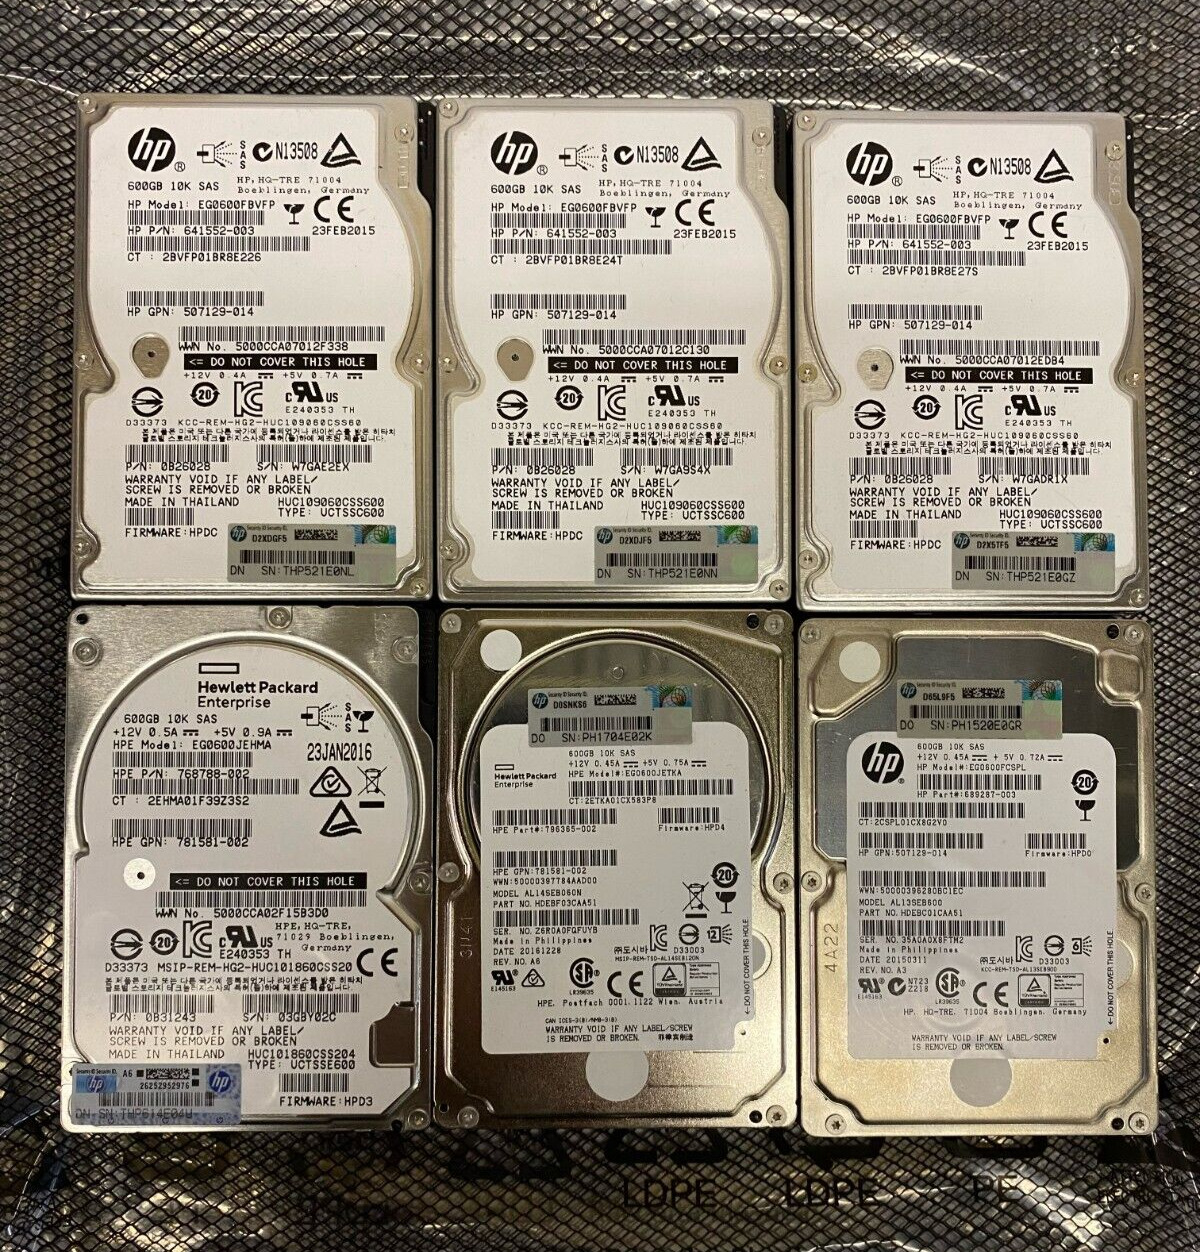 Used Lot of 6 HP Mixed Model 600 GB SAS 2.5 in 10K RPM Hard Drives HDD